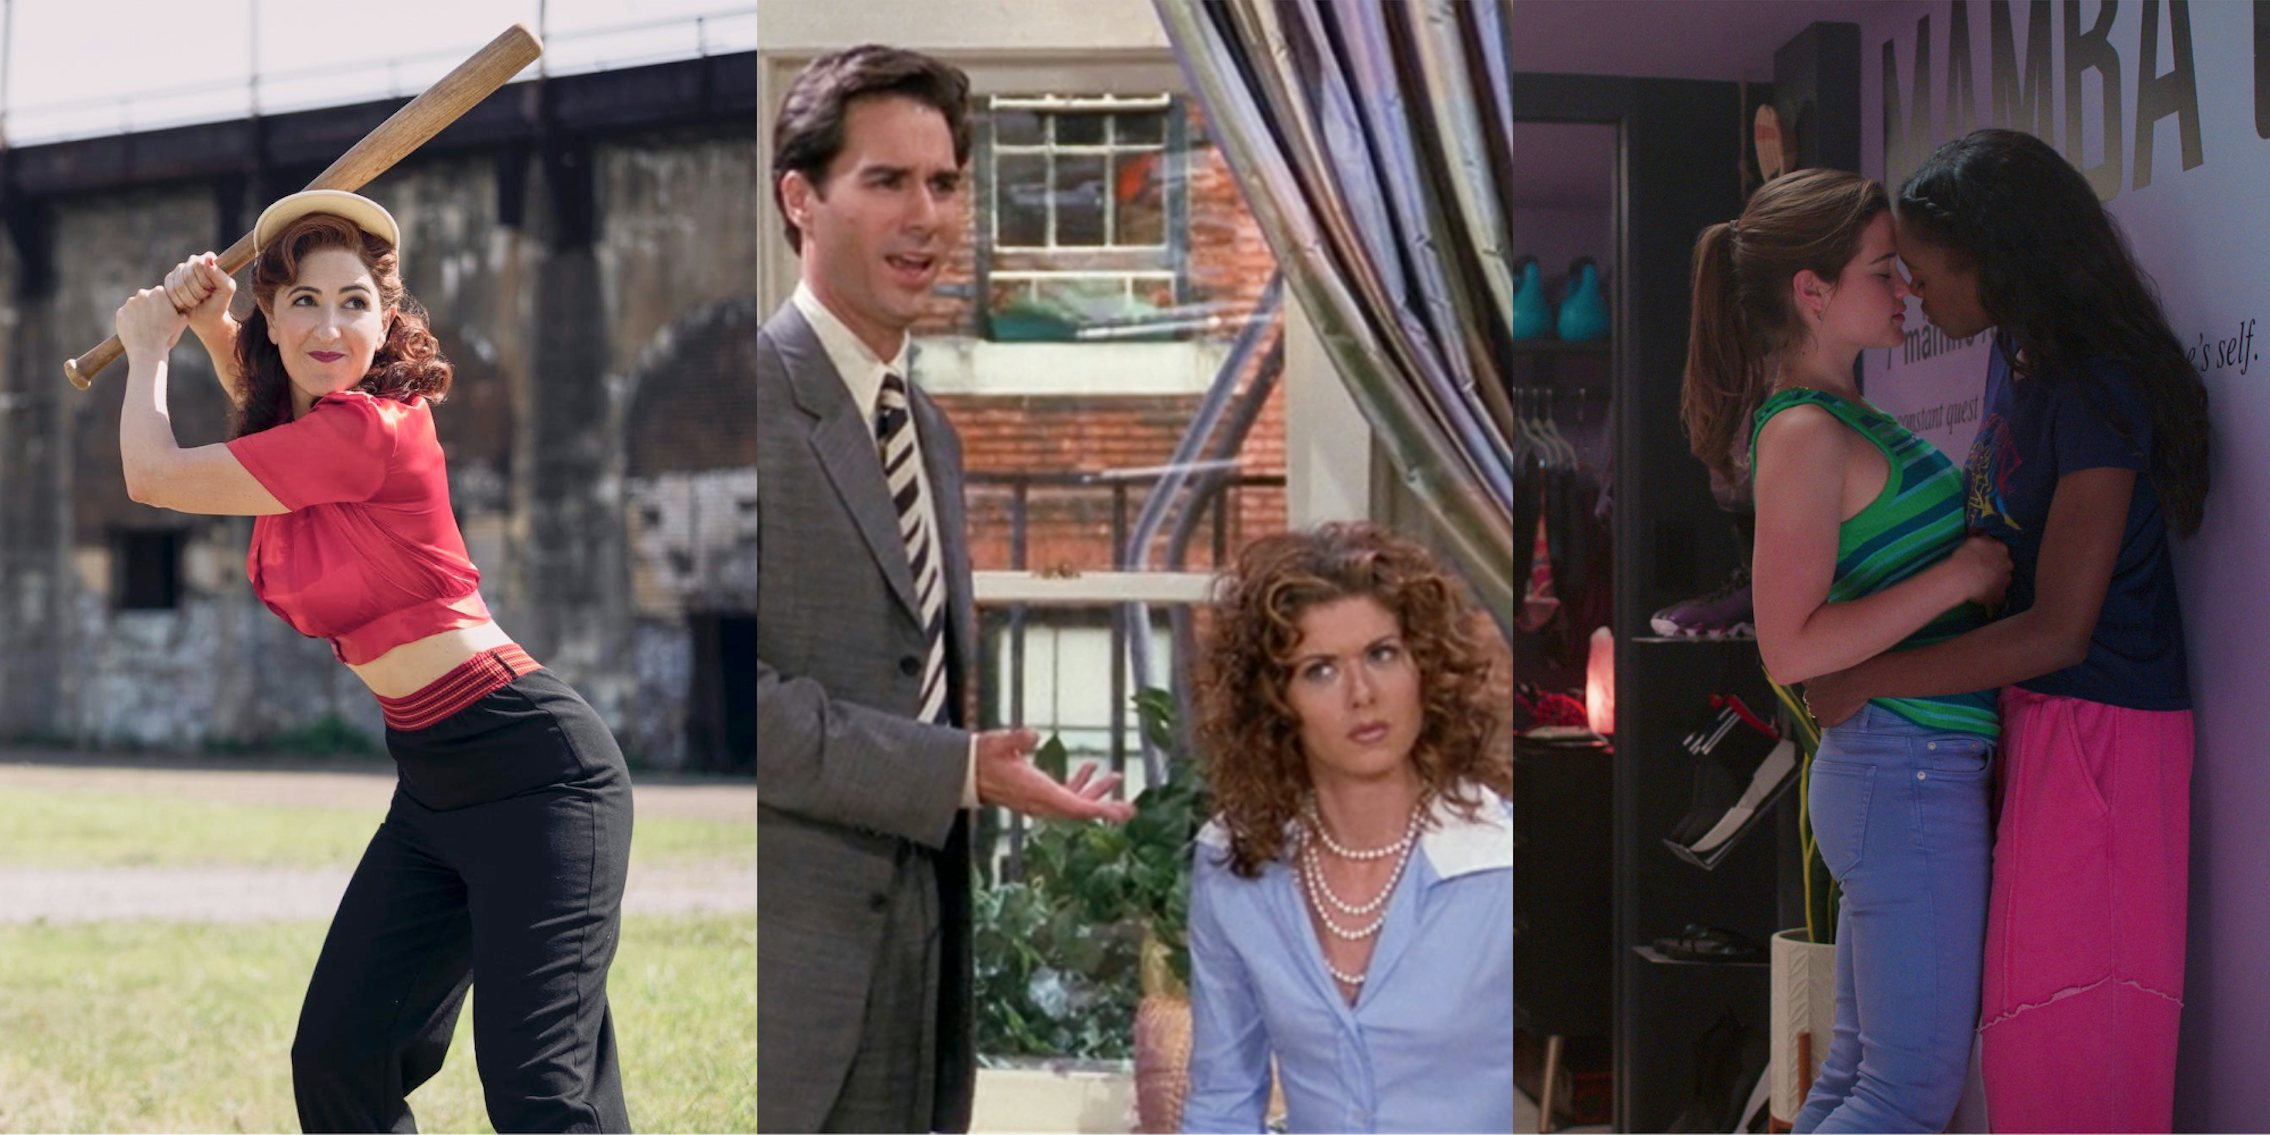 A woman swinging a bat, a man and a woman in a conversation, and two women embracing. These are all stills from TV shows featuring LGBTQ characters.